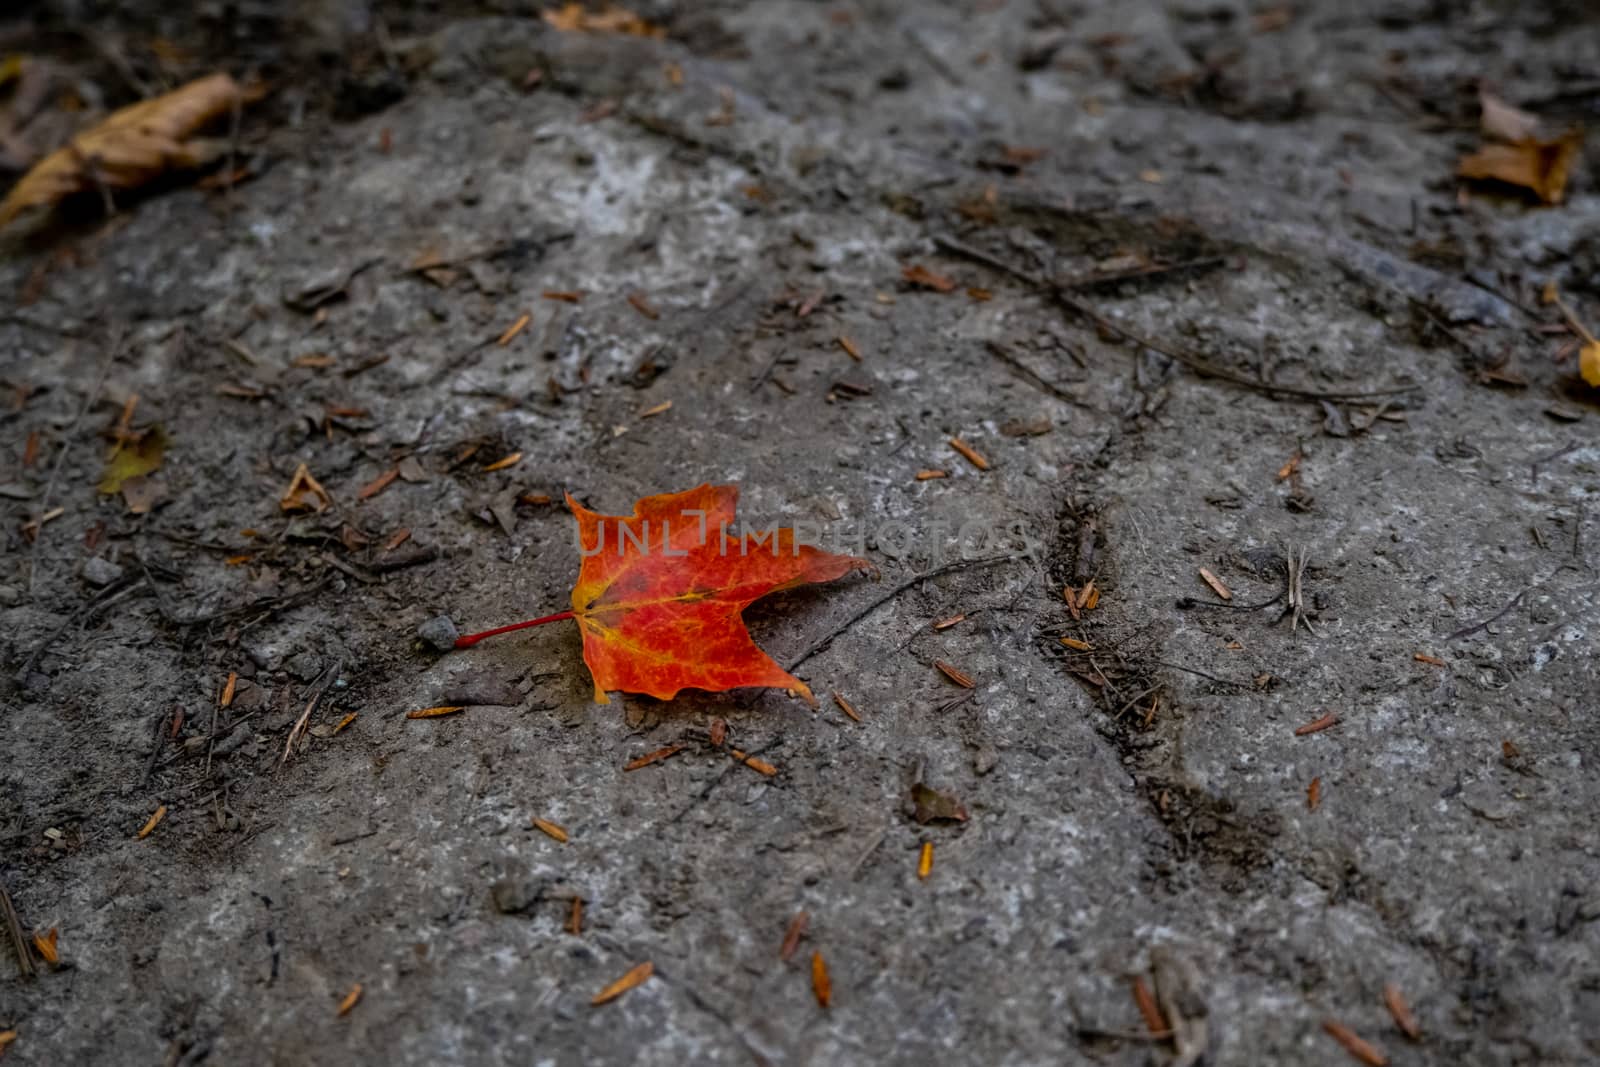 A single fallen maple leaf has red and orange coloring where it lies on a rocky surface in the woods.